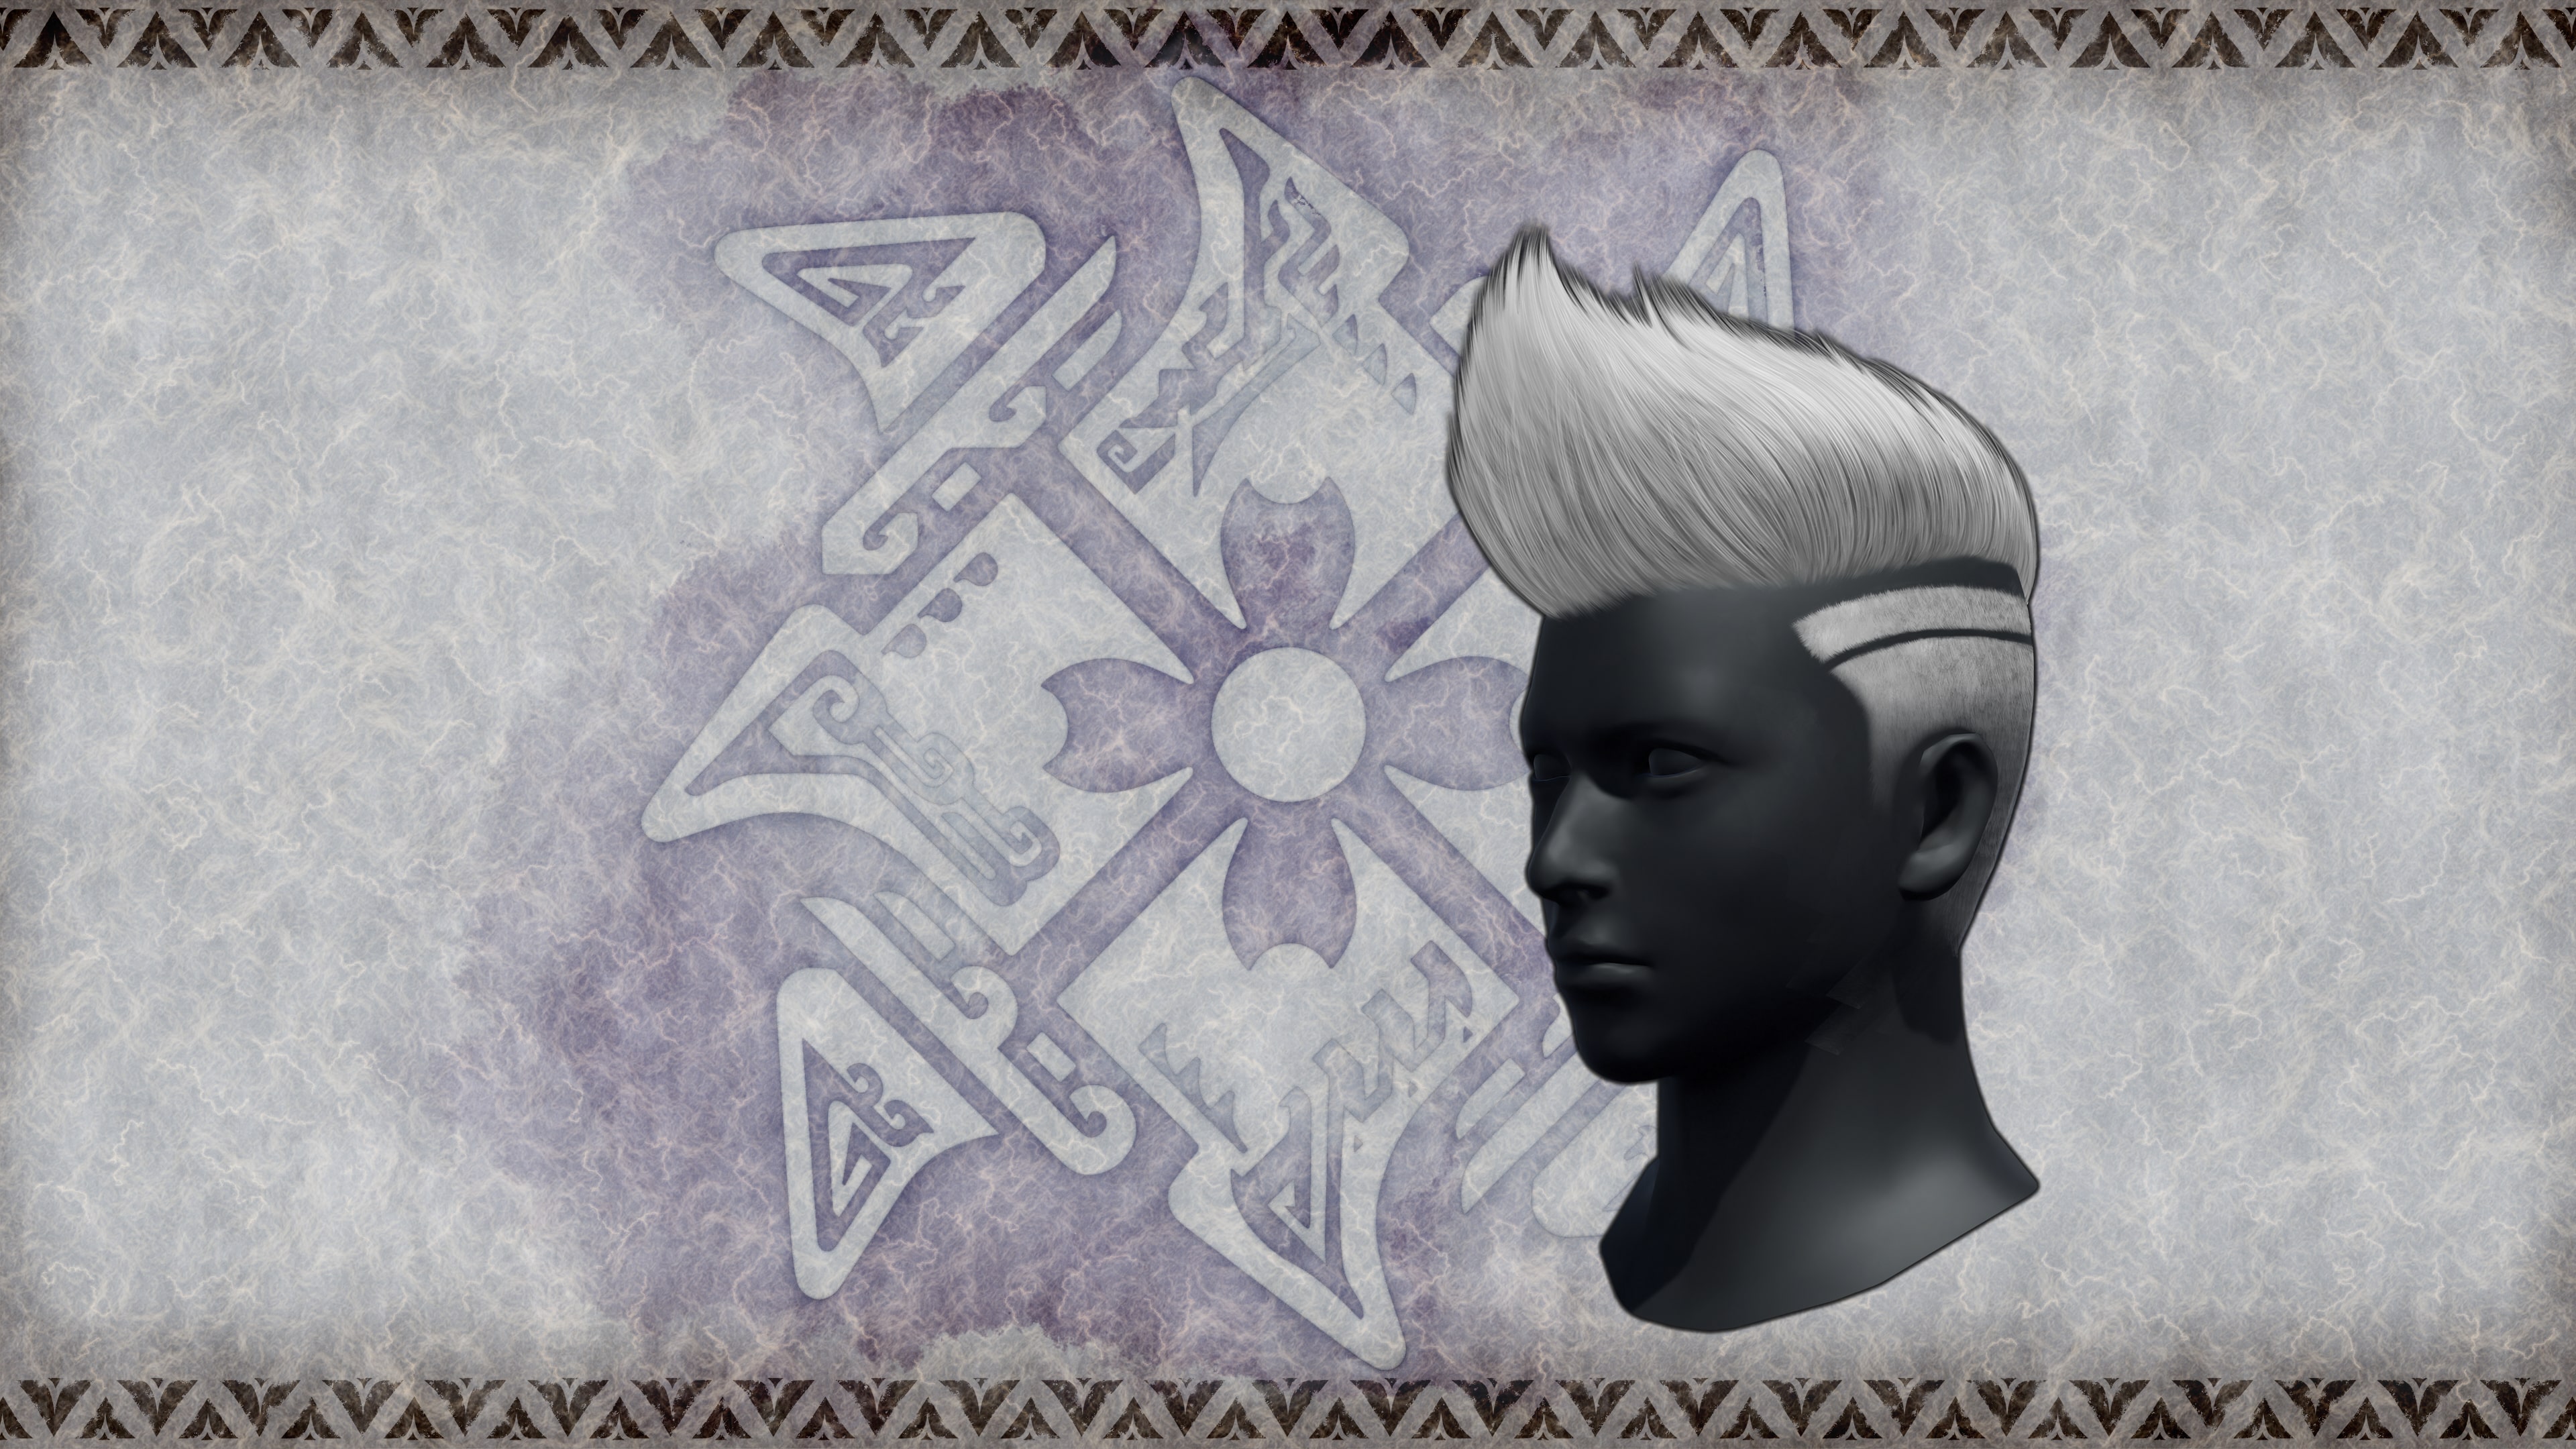 Monster Hunter Rise - "Great Baggi Crest" hairstyle